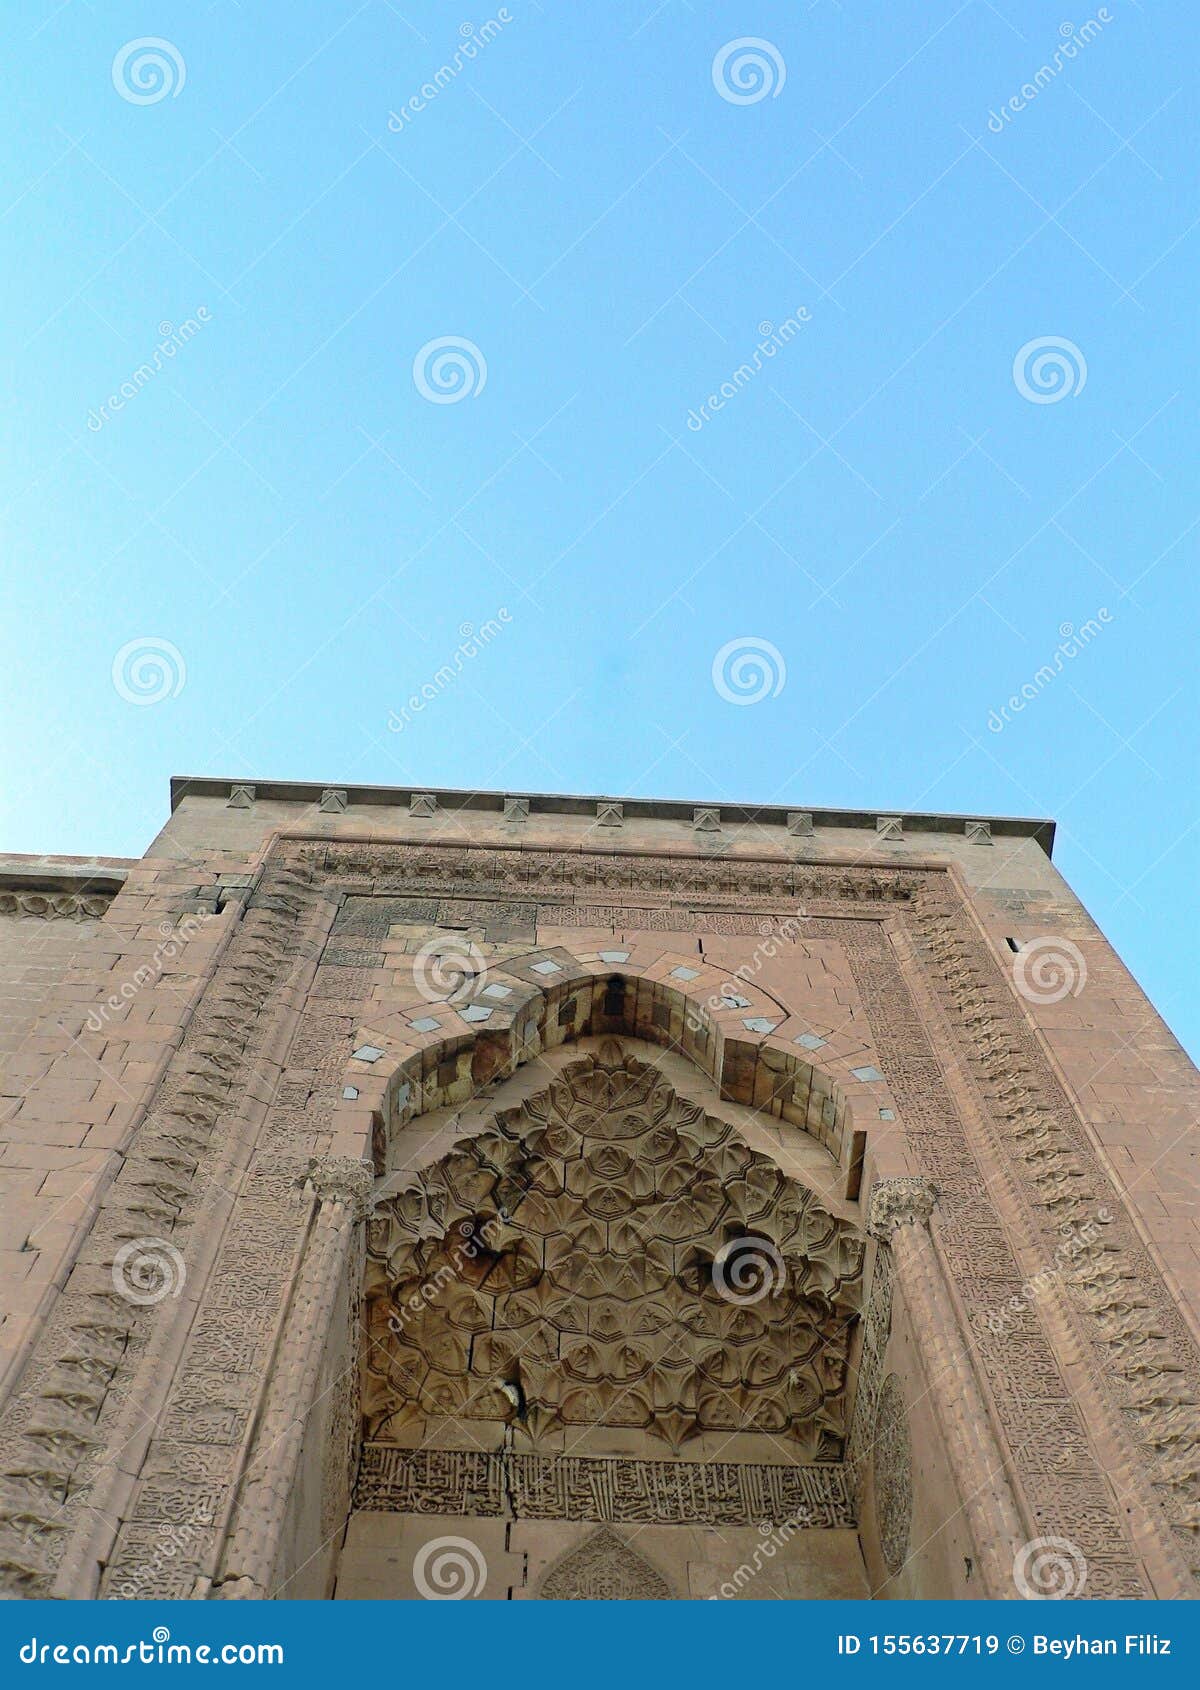 workmanship at the entrance of a historic building in the city of mardin in turkey.